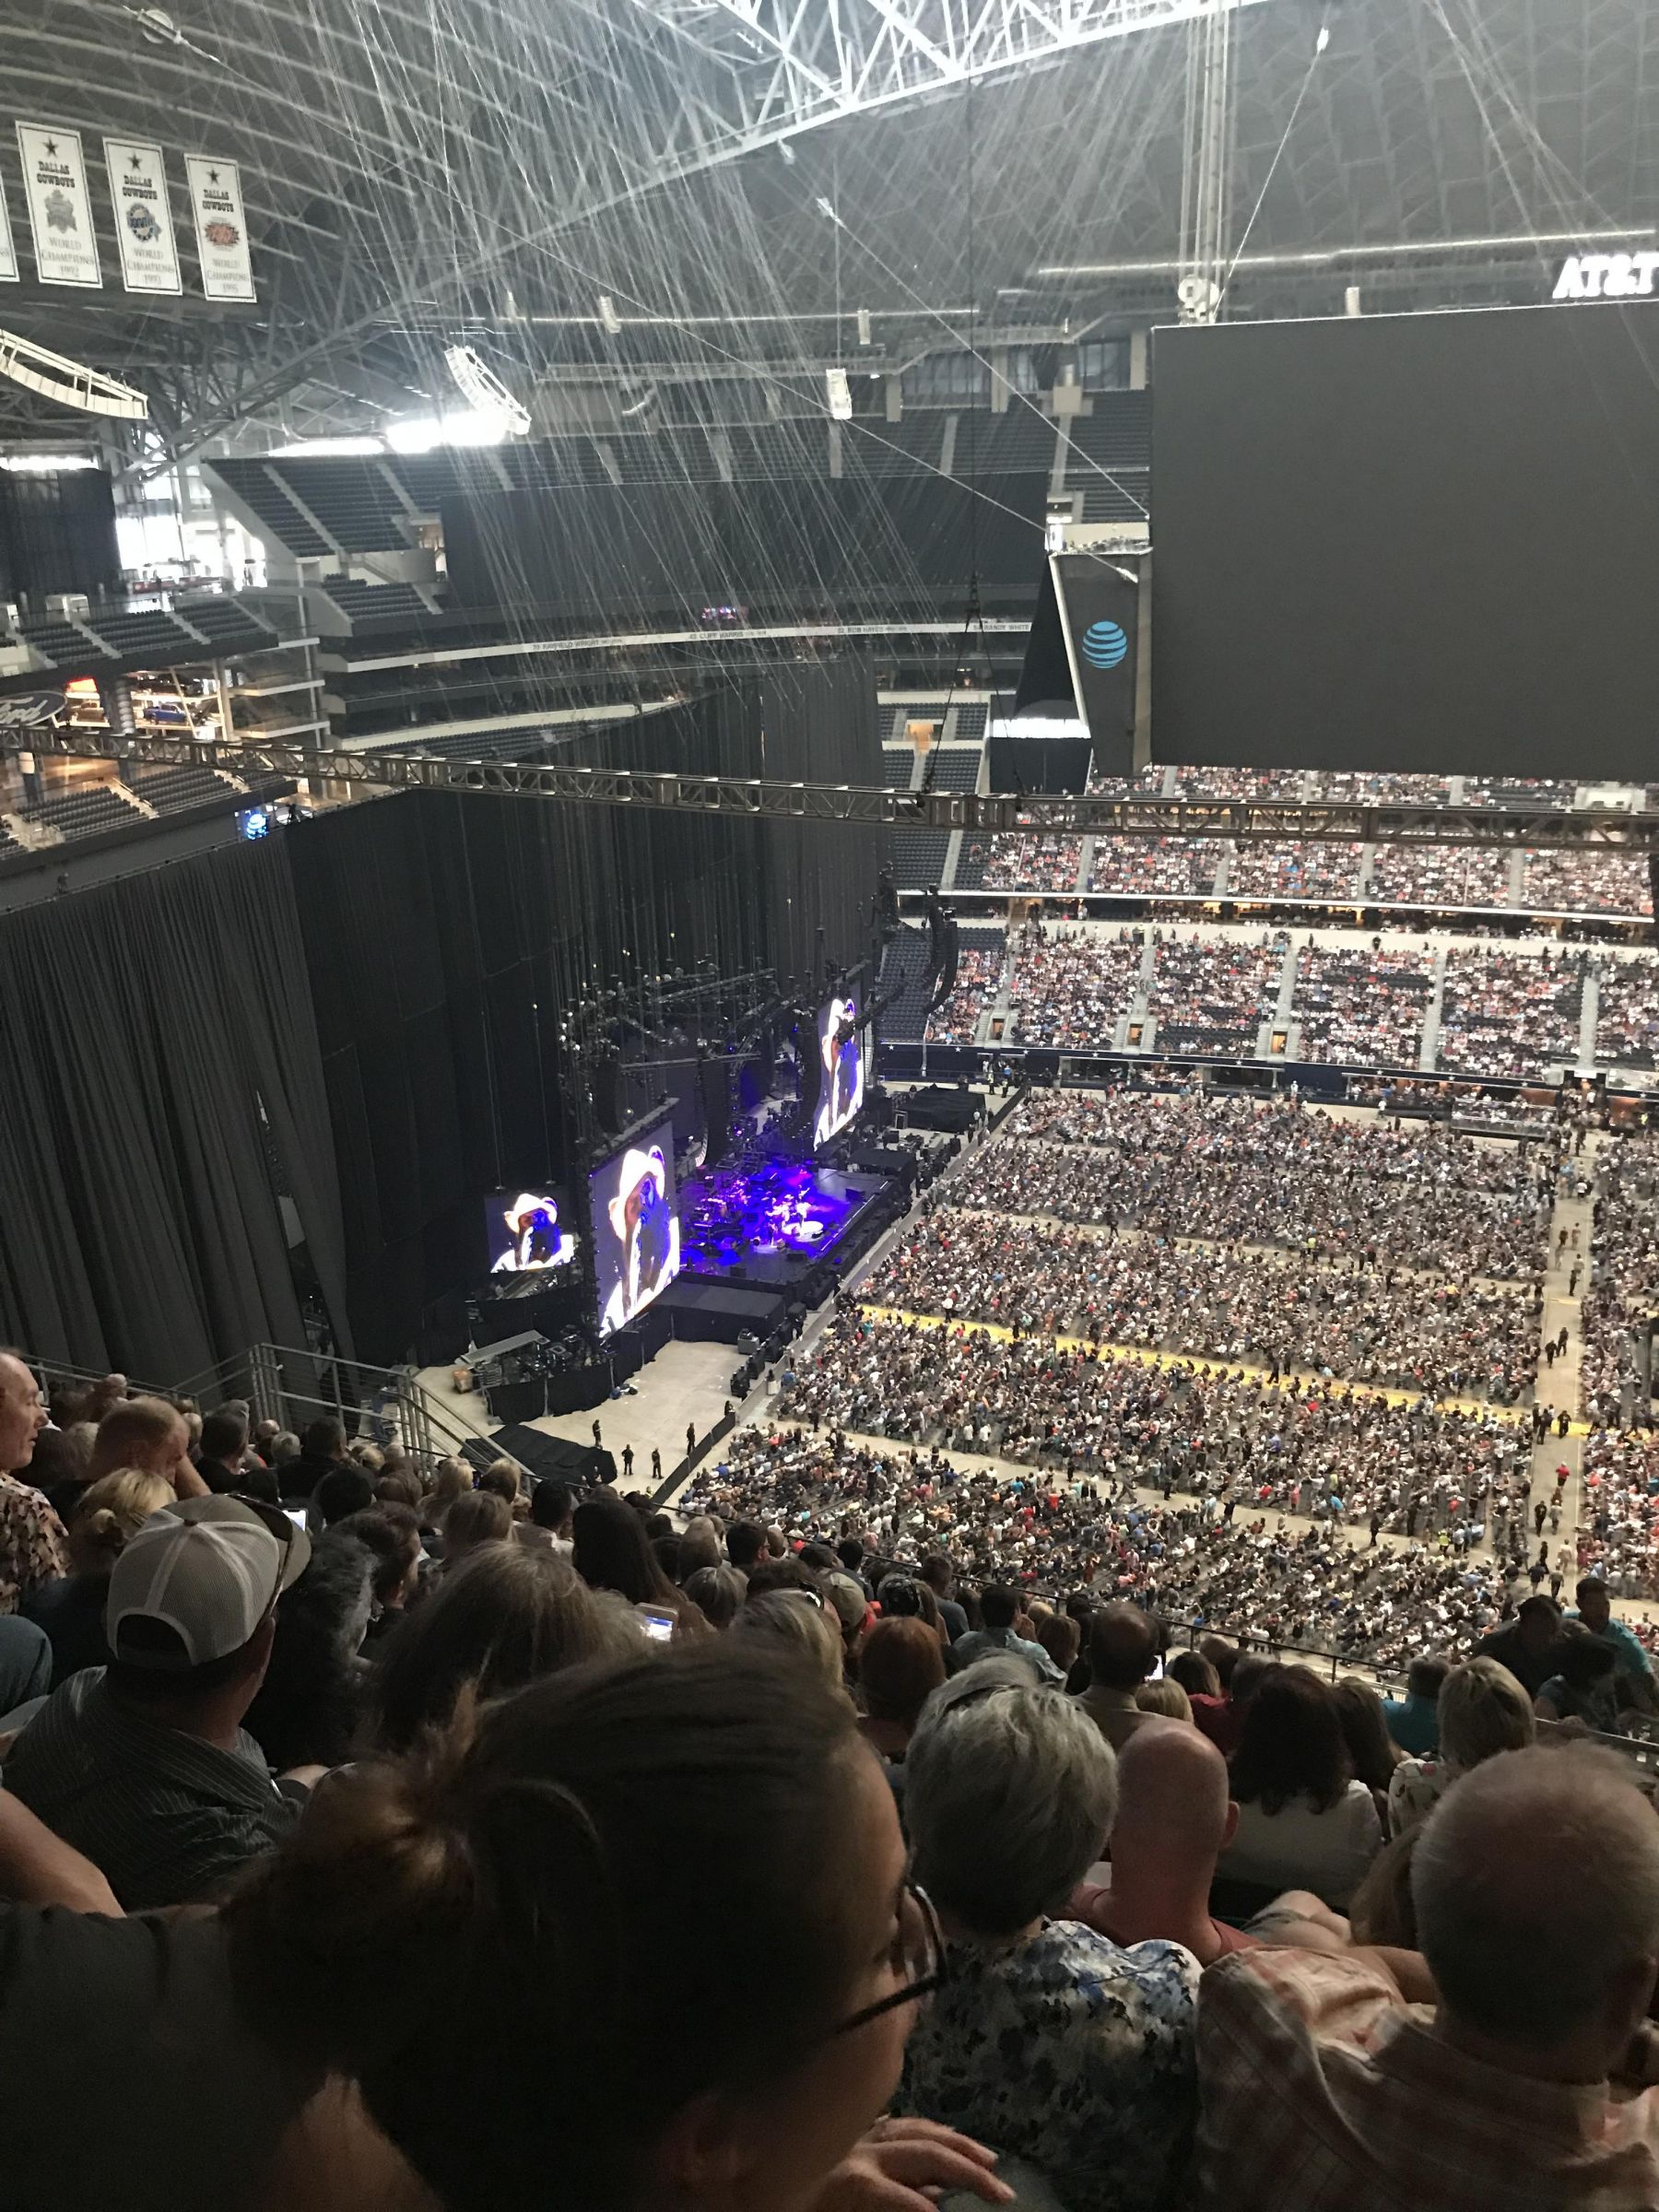 section 443, row 22 seat view  for concert - at&t stadium (cowboys stadium)